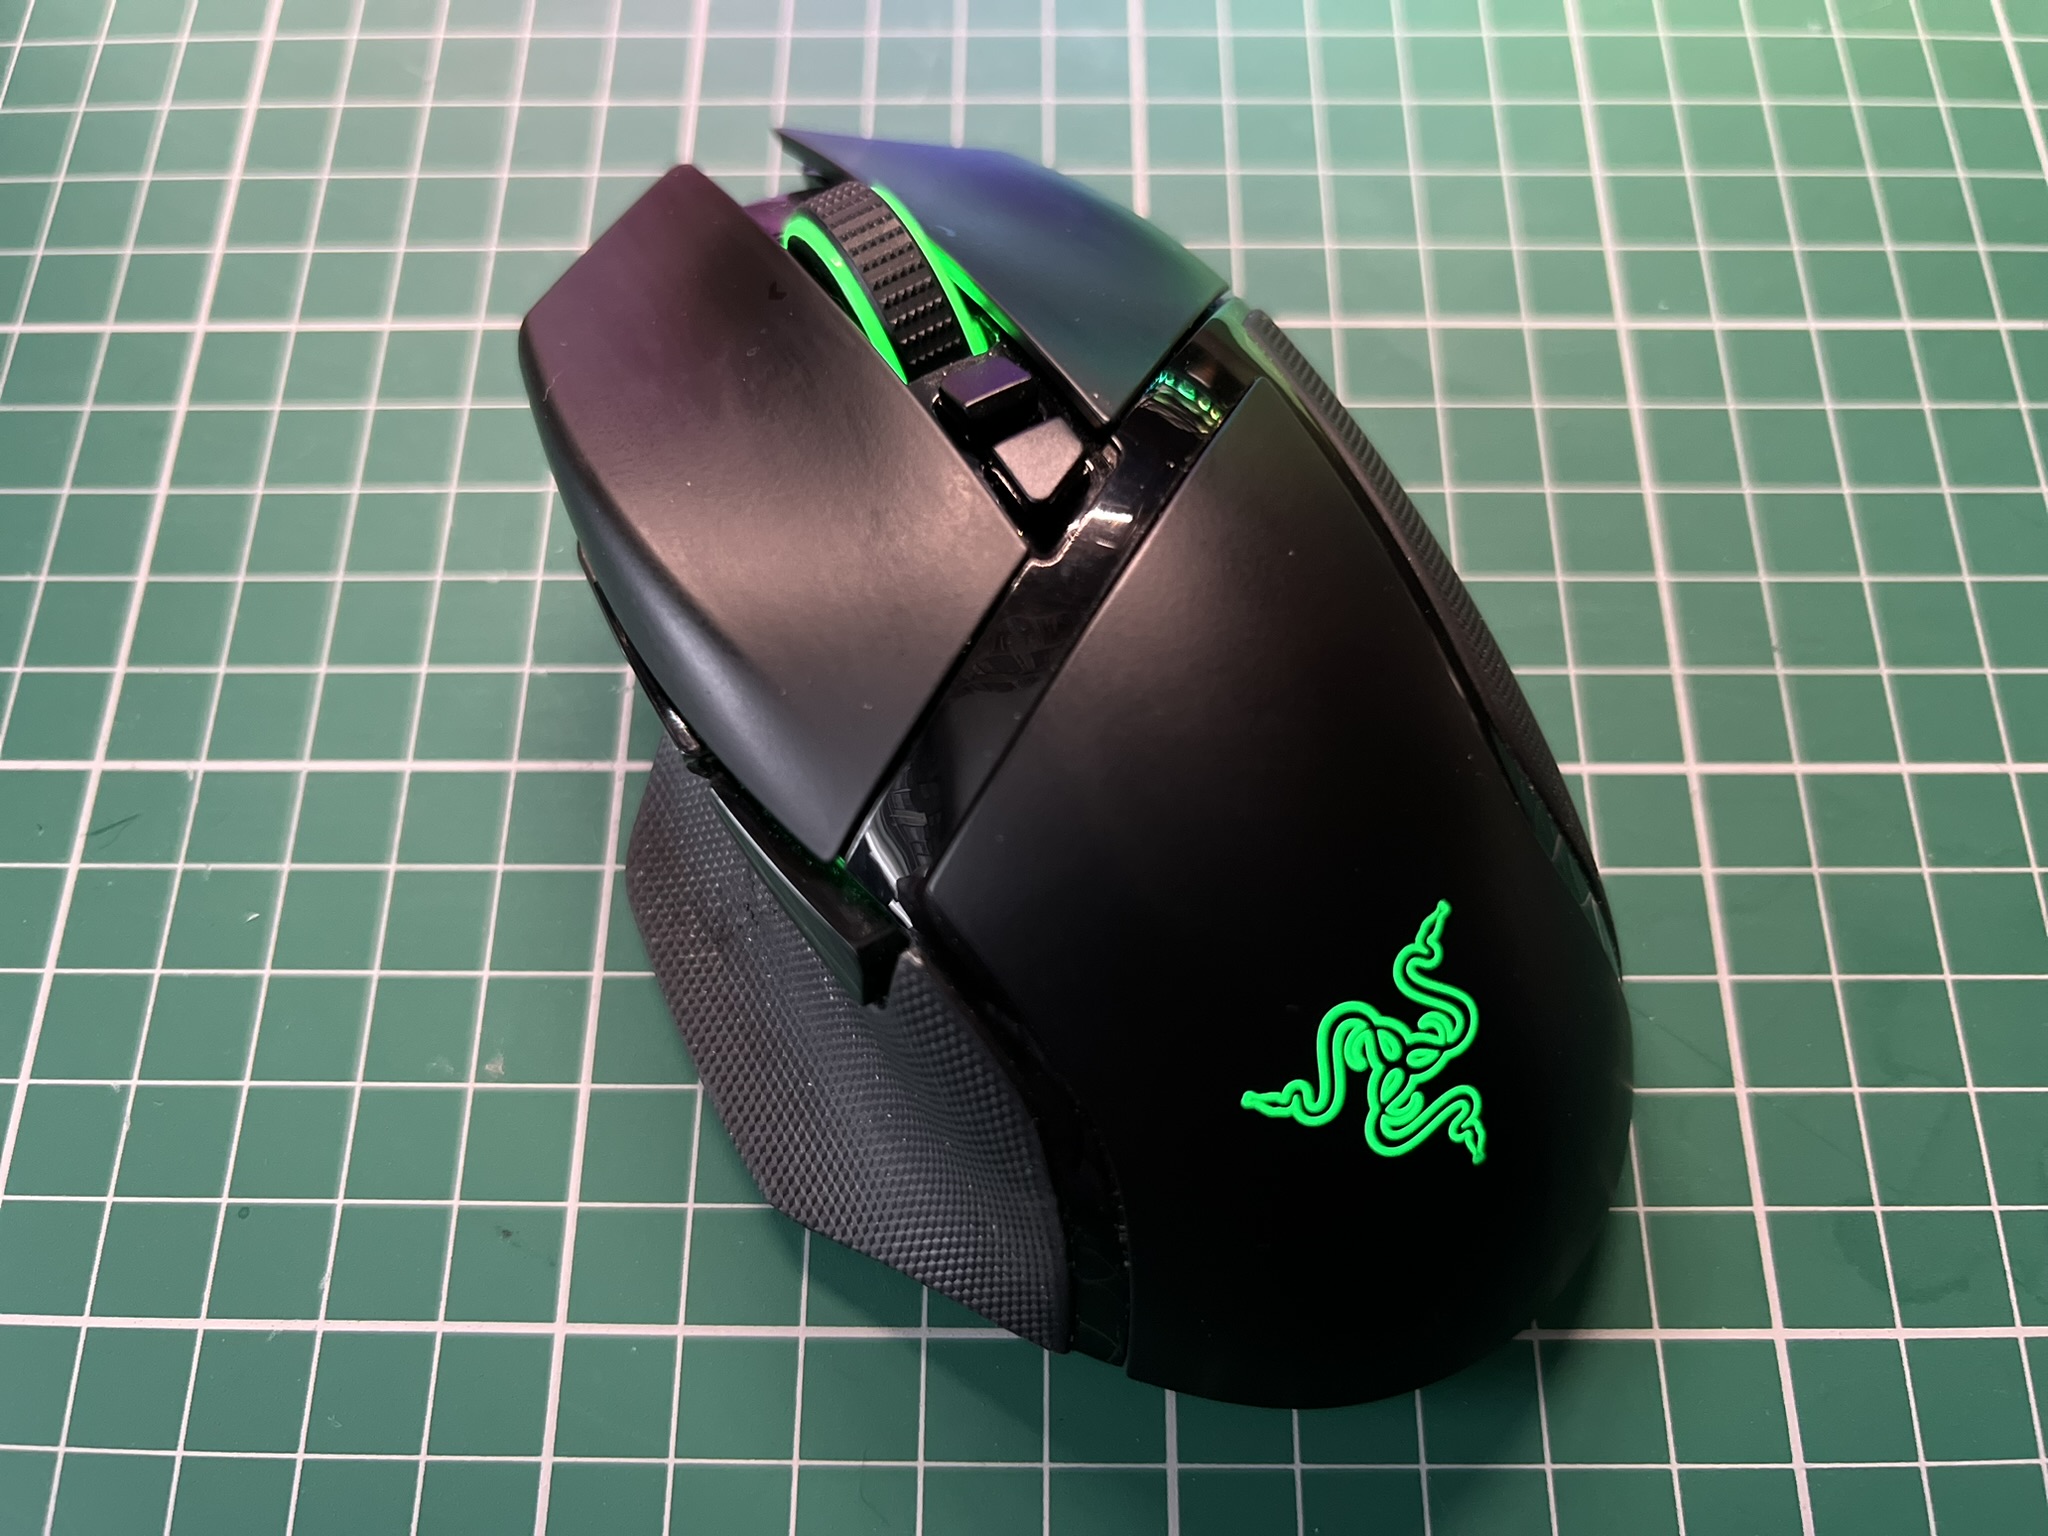 Razer Basilisk V3 Pro review: The ultimate all-round gaming mouse